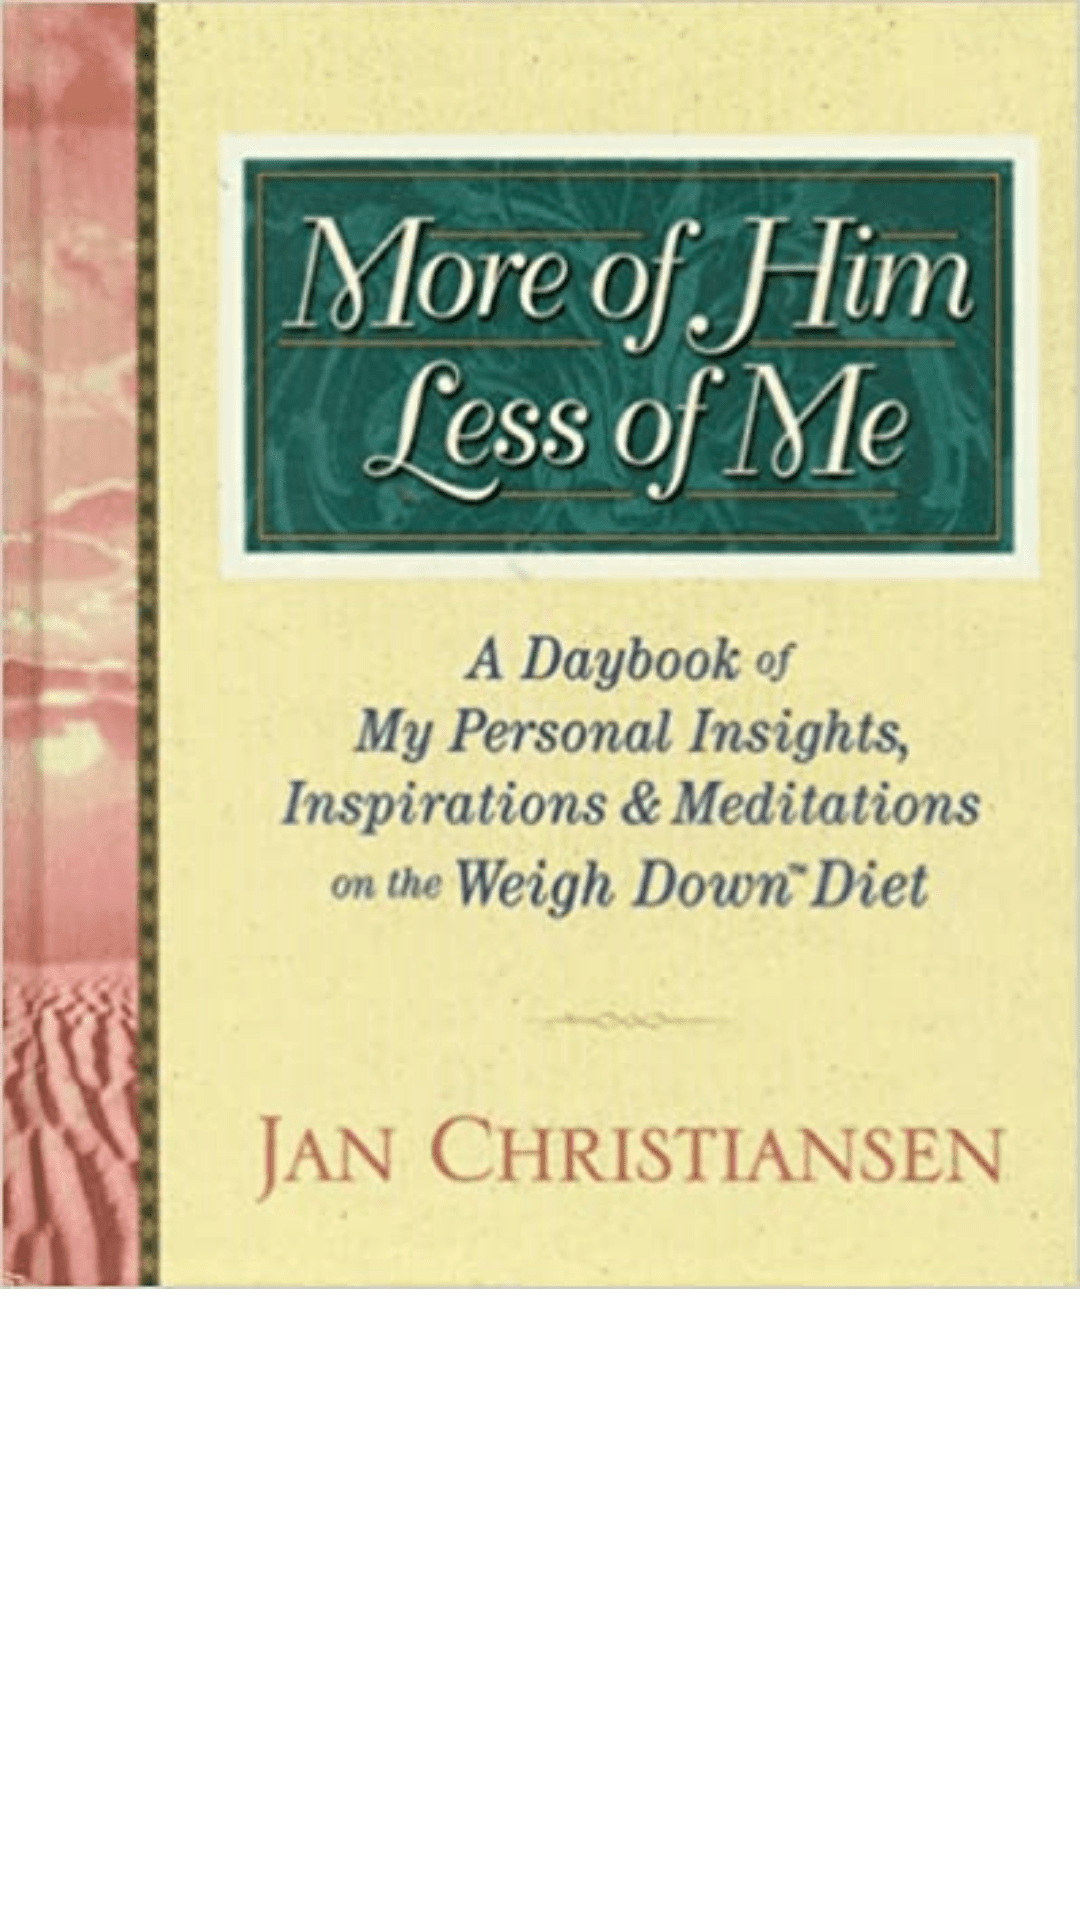 More of Him, Less of Me: My Personal Thoughts, Inspriations, and Meditations on the Weigh Down Diet